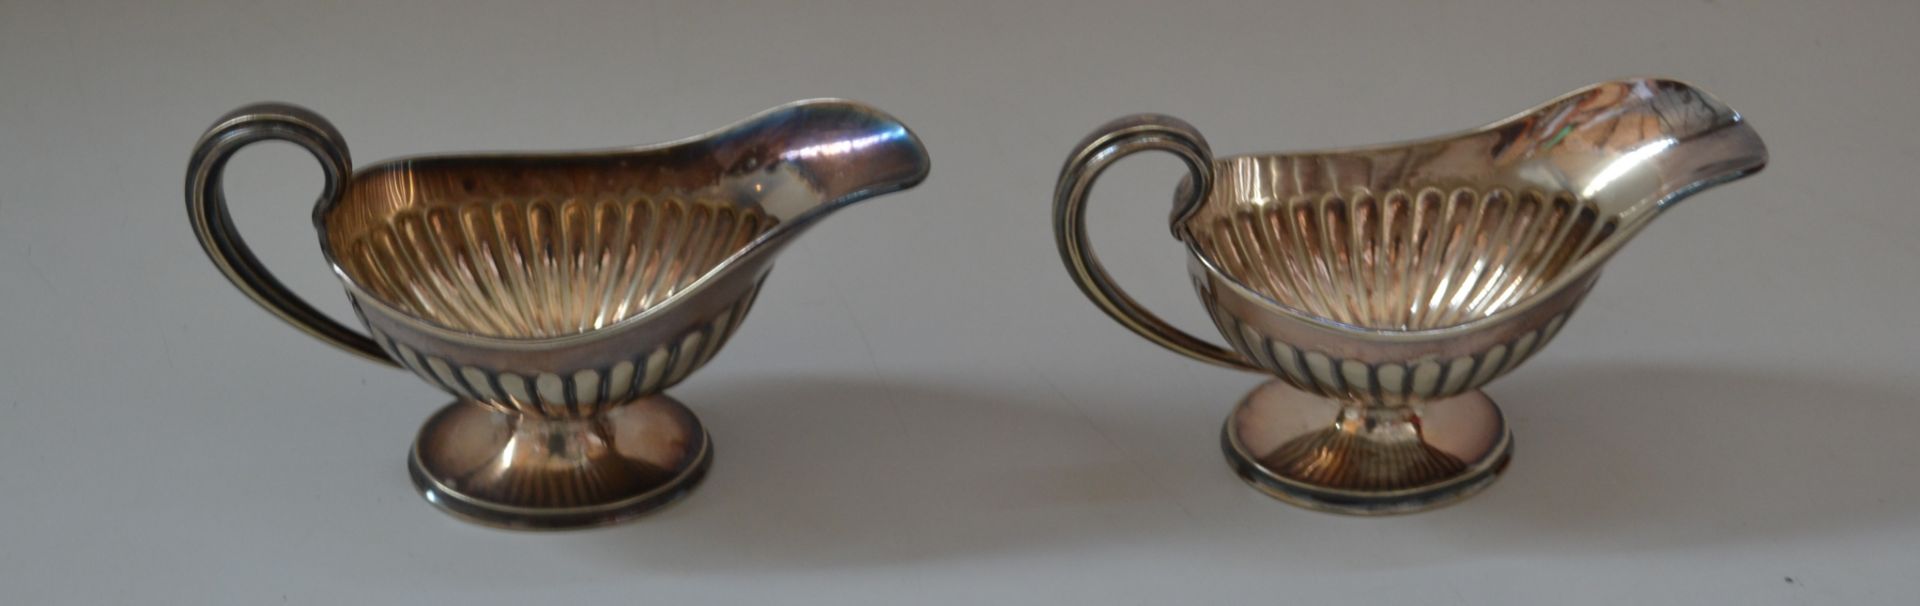 1 x A Pair Of Silver Plated Gravy Boats - Ref J2172 - CL314